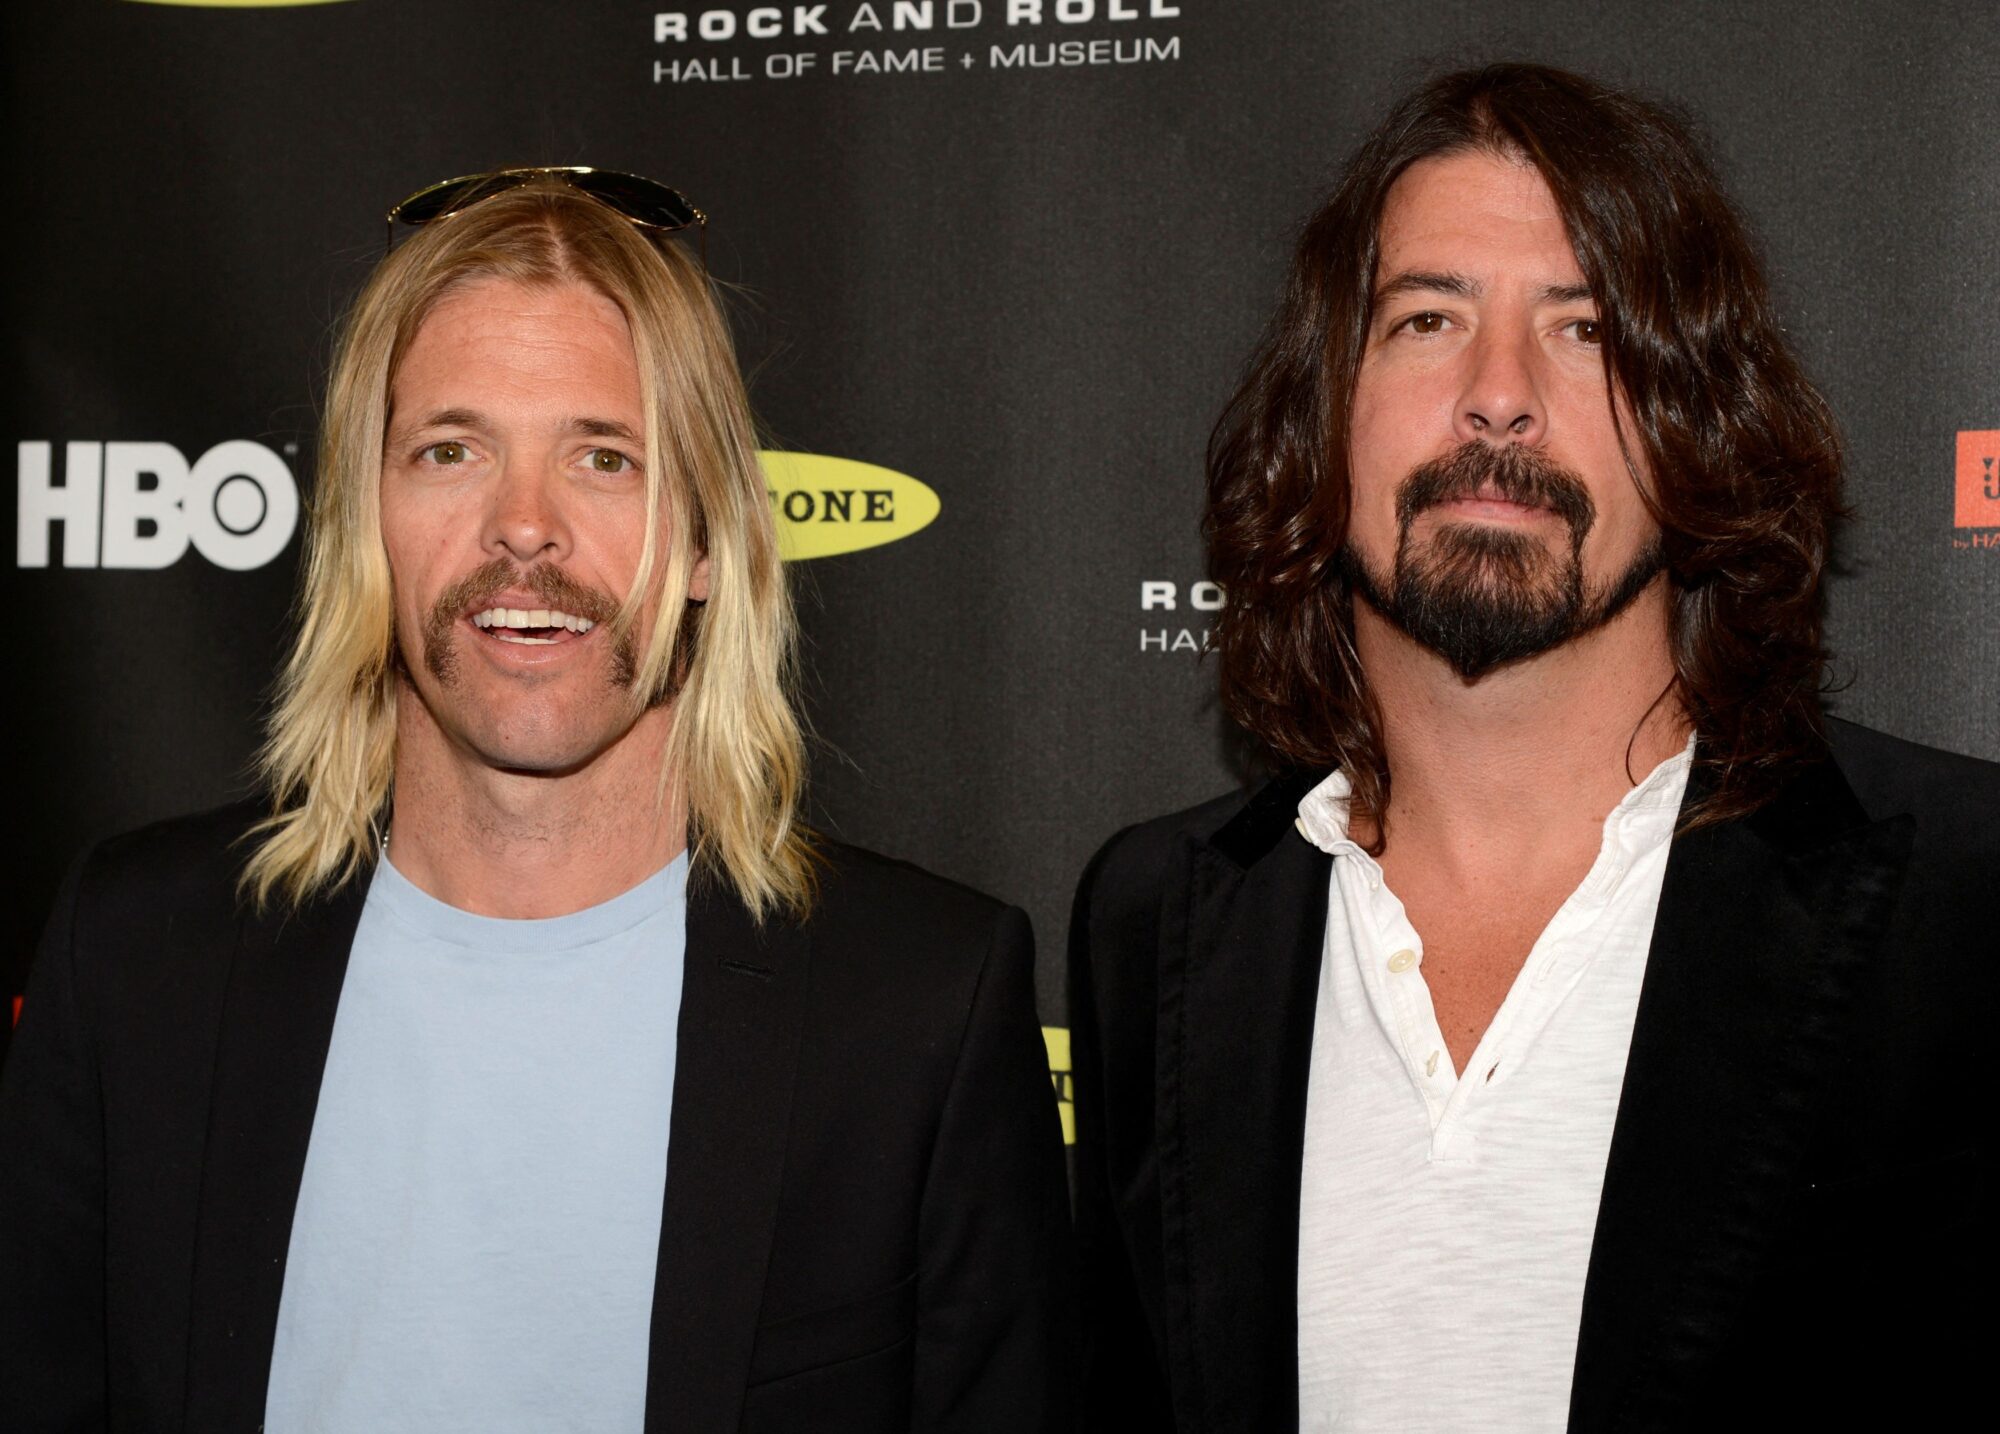 Taylor Hawkins and Dave Grohl of the Foo Fighters arrive at the 2013 Rock and Roll Hall of Fame induction ceremony in Los Angeles April 18, 2013. REUTERS/Phil McCarten/File Photo